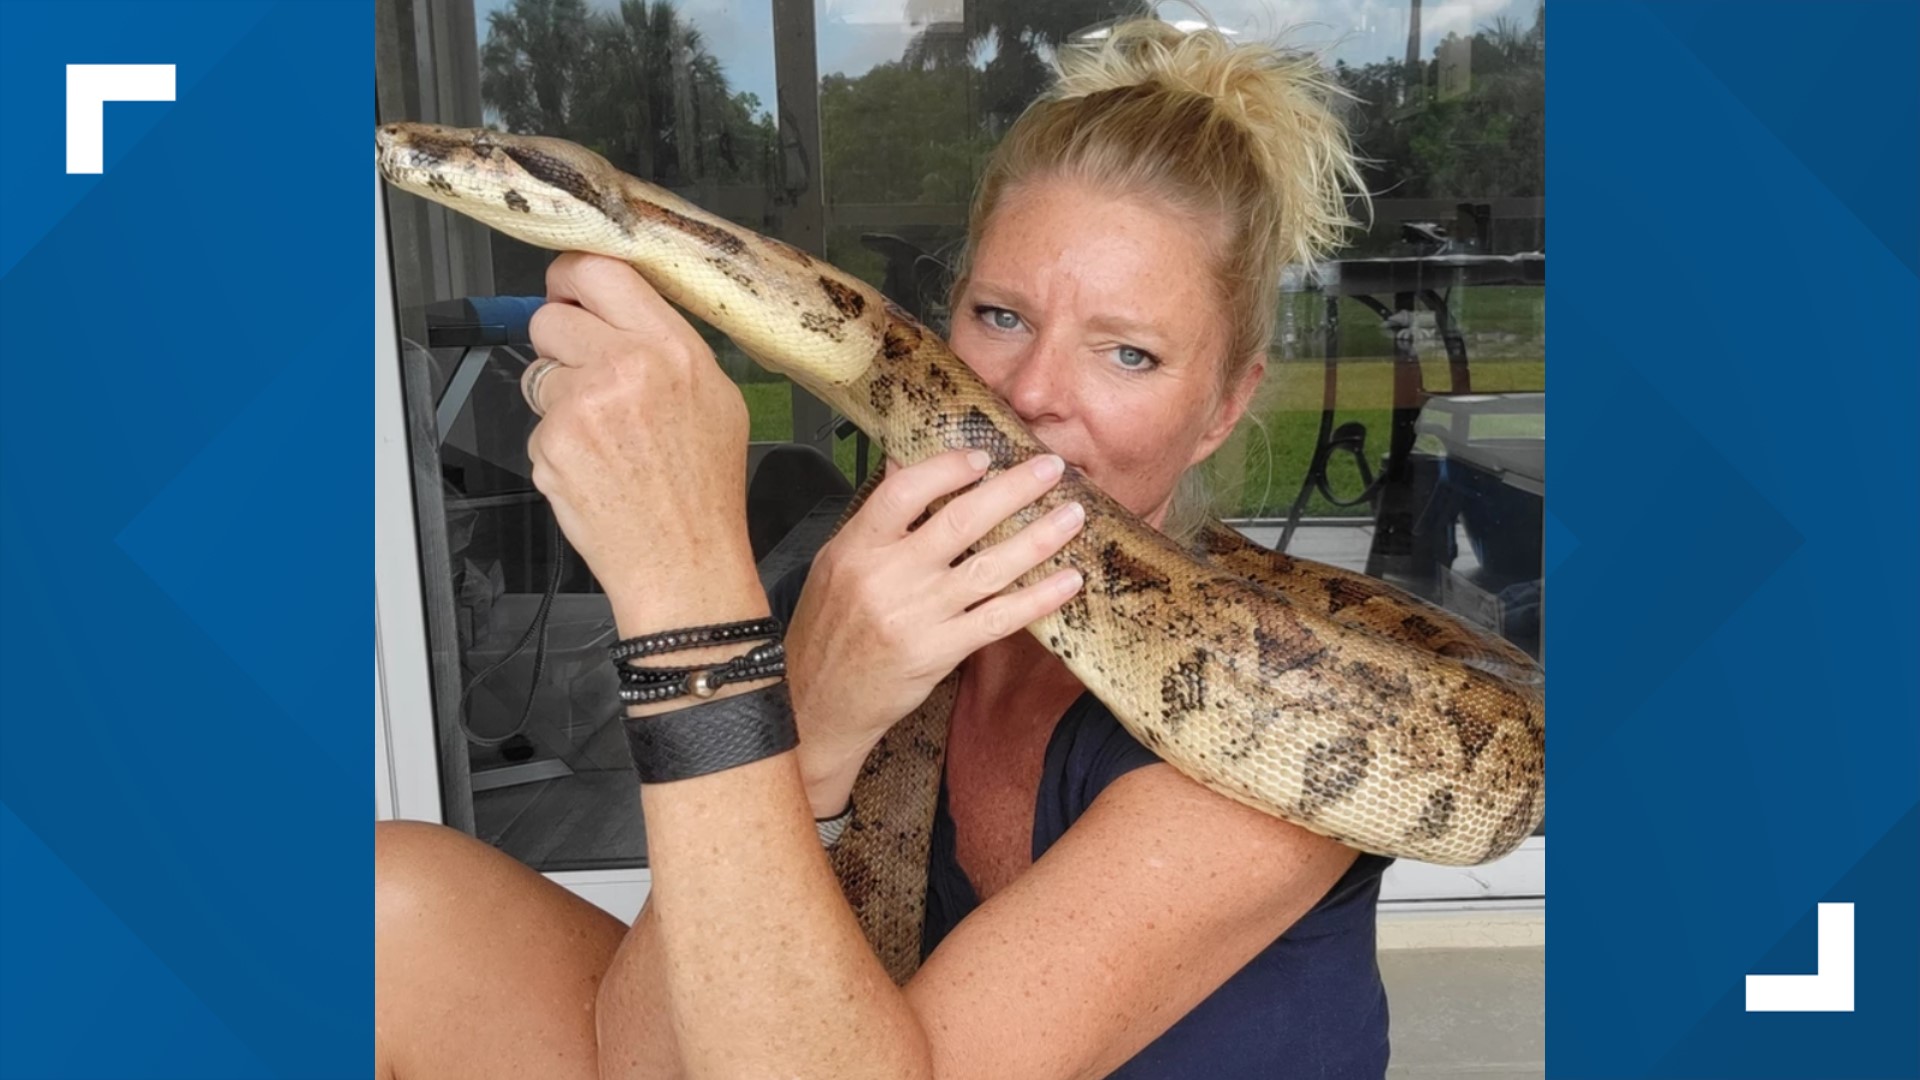 The former Hoosier was hired by the state of Florida to eradicate a growing python problem.